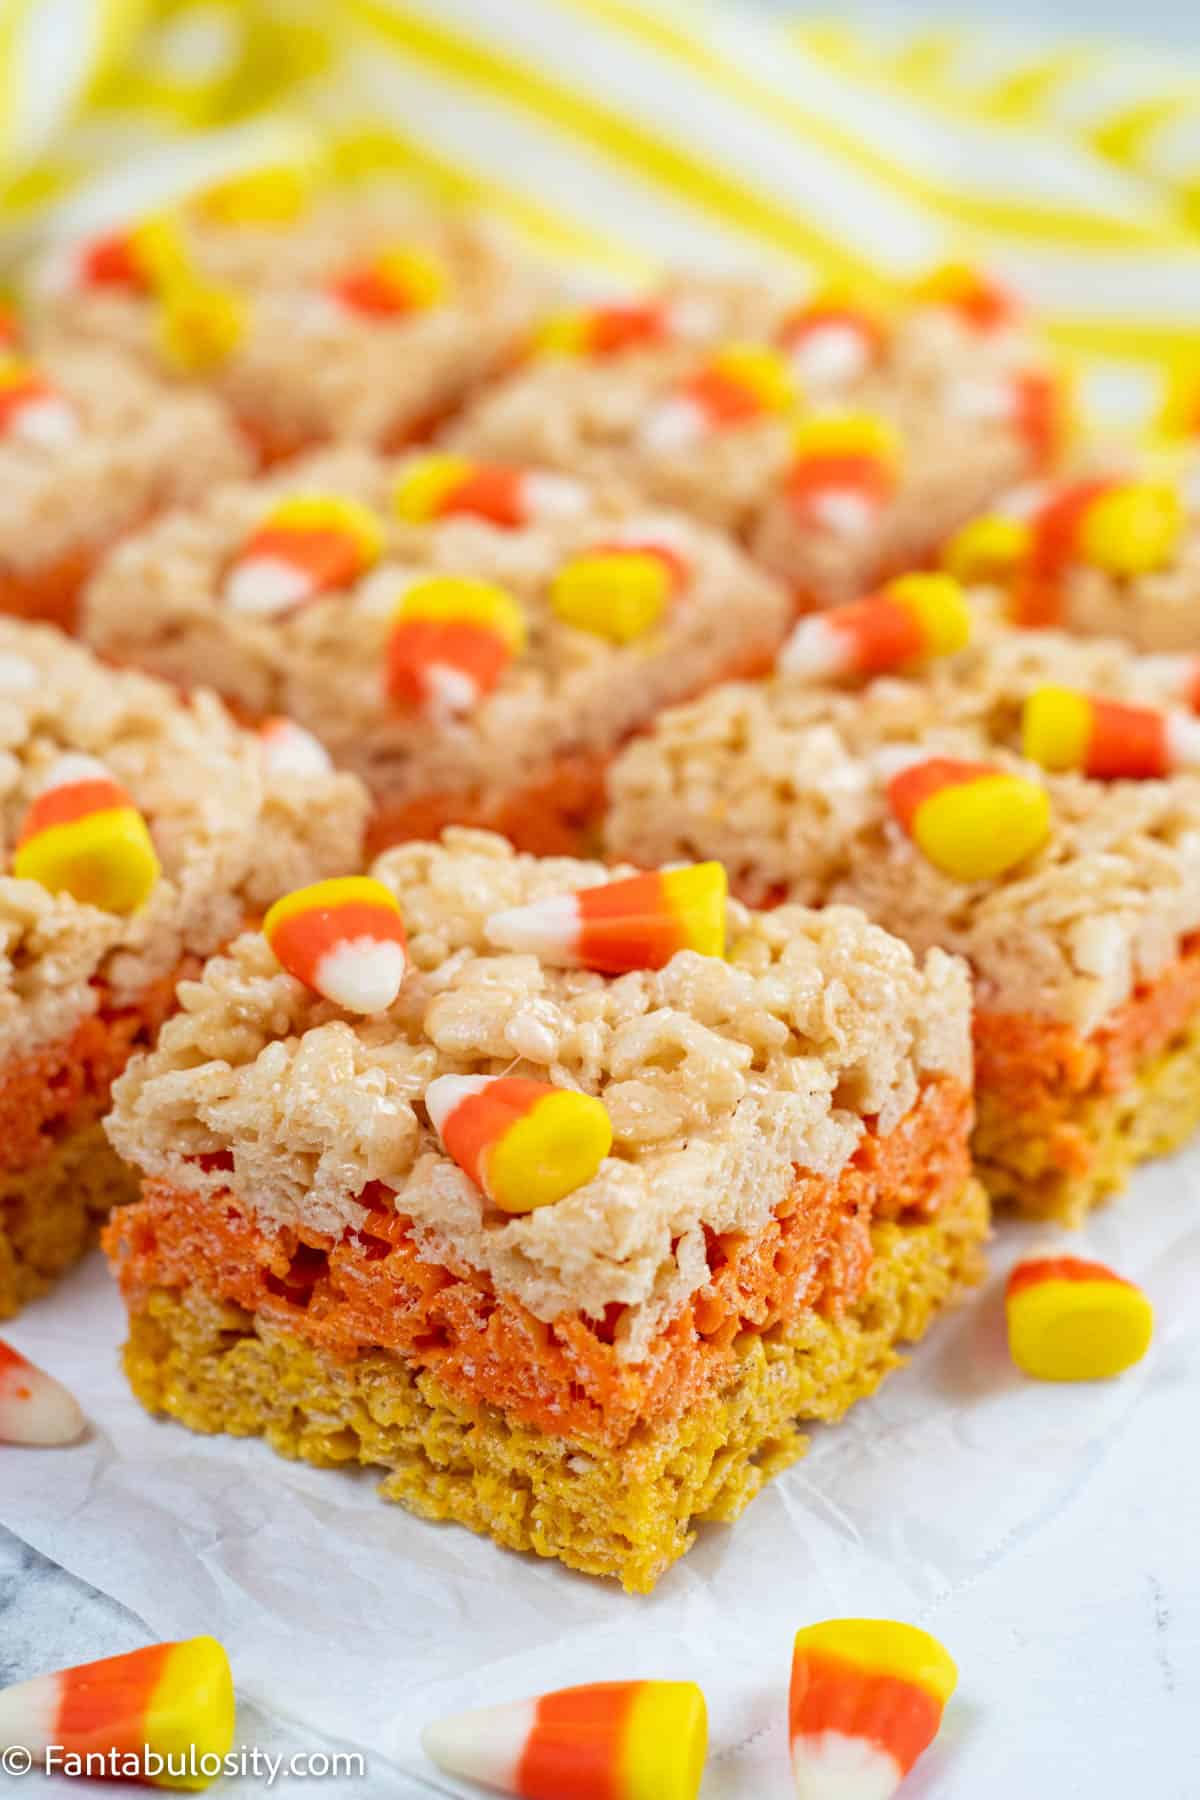 Close up of the a candy corn rice krispie treat, showing the yellow, orange and white layers of the treat